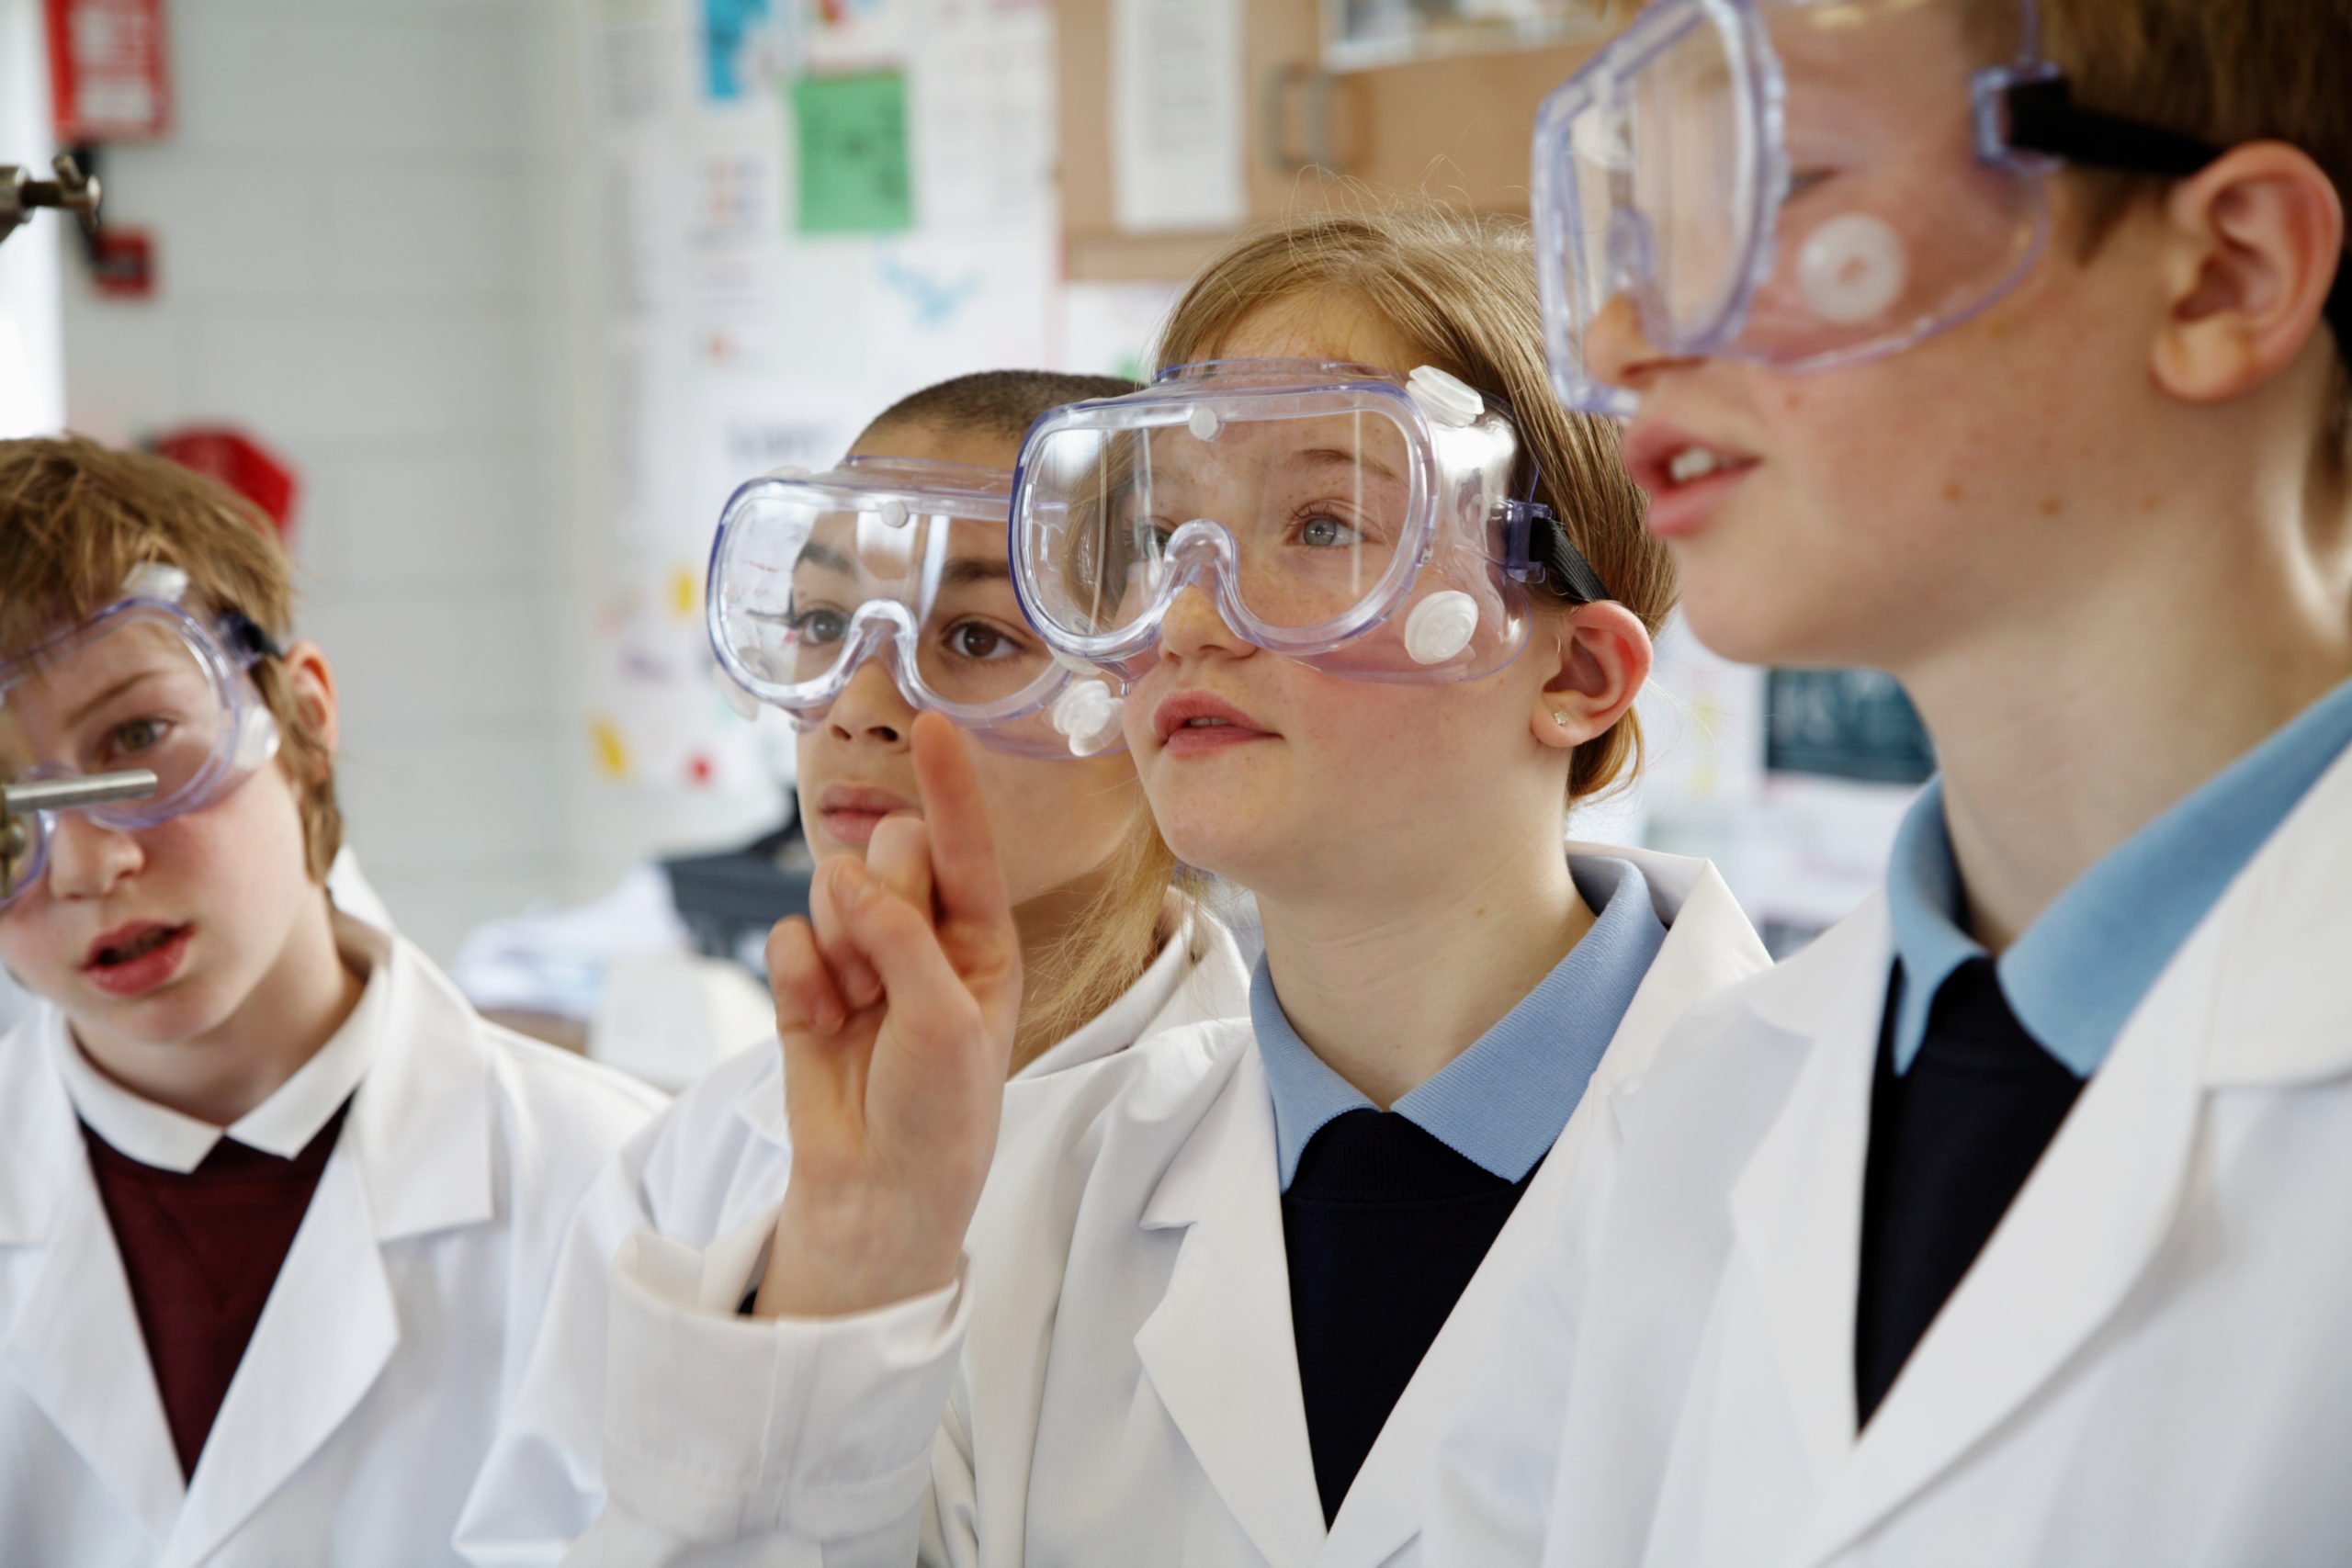 Schoolgirl and three schoolboys (11-13) in science lesson